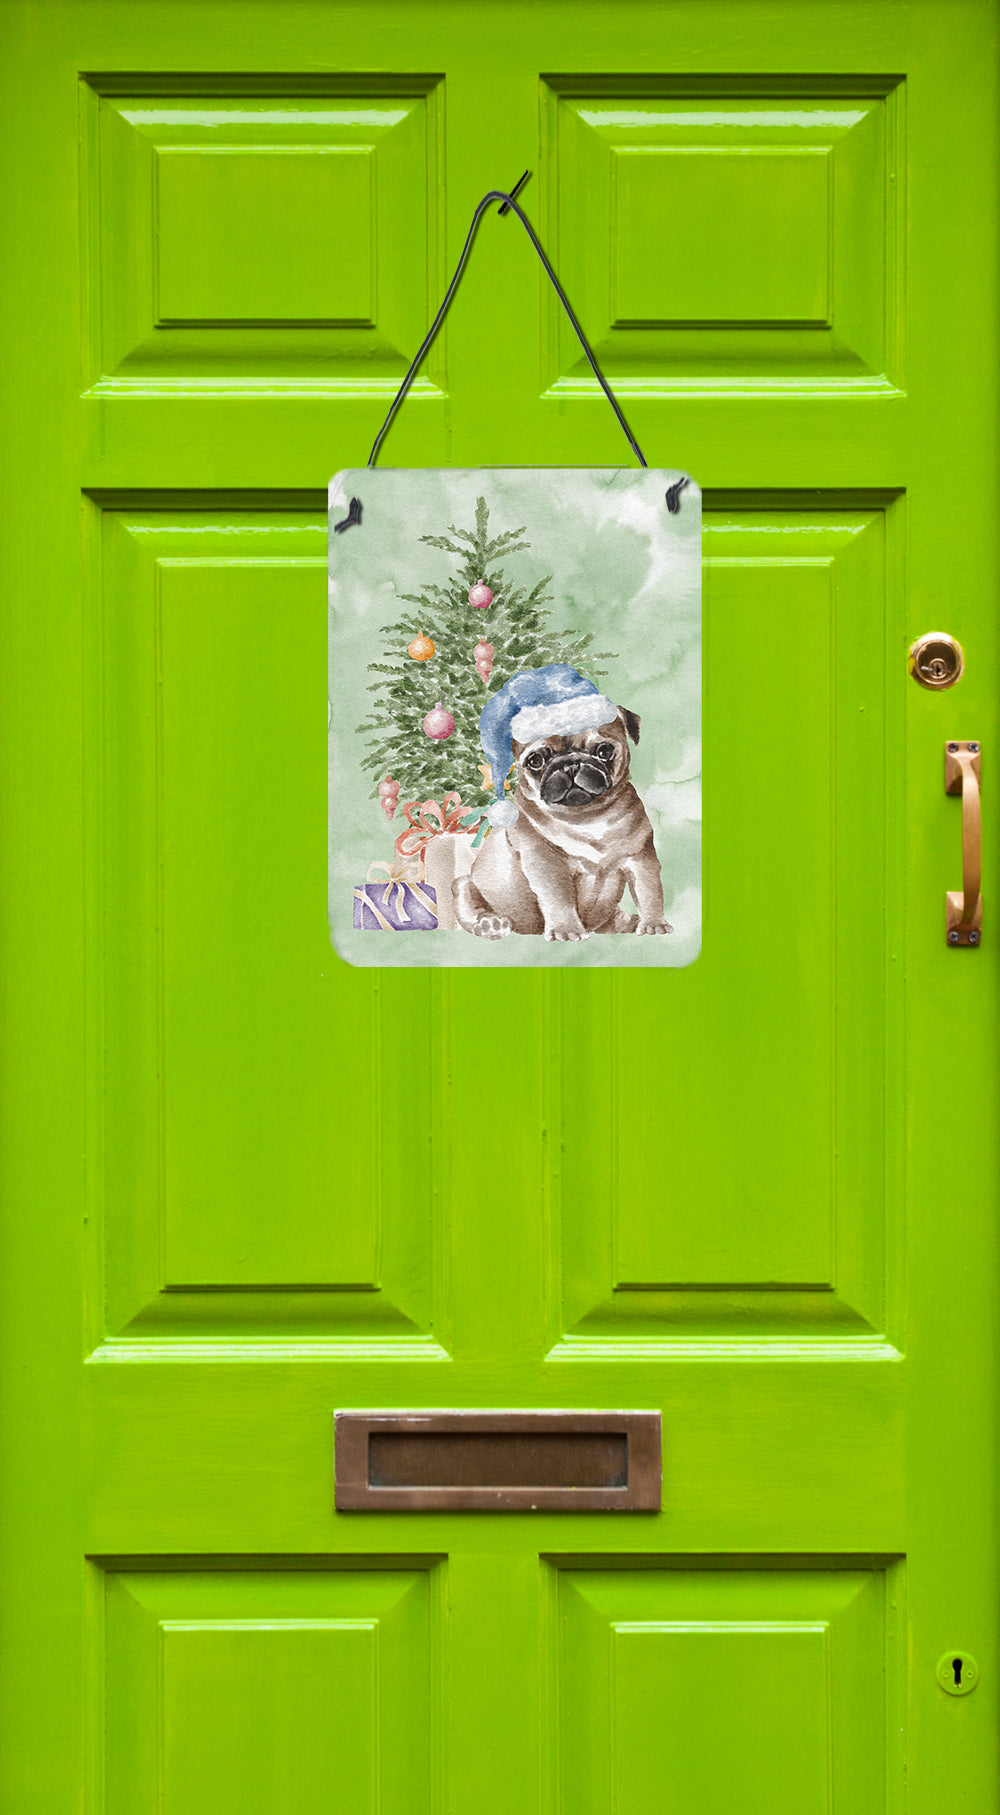 Buy this Christmas Fawn Pug Puppy Wall or Door Hanging Prints